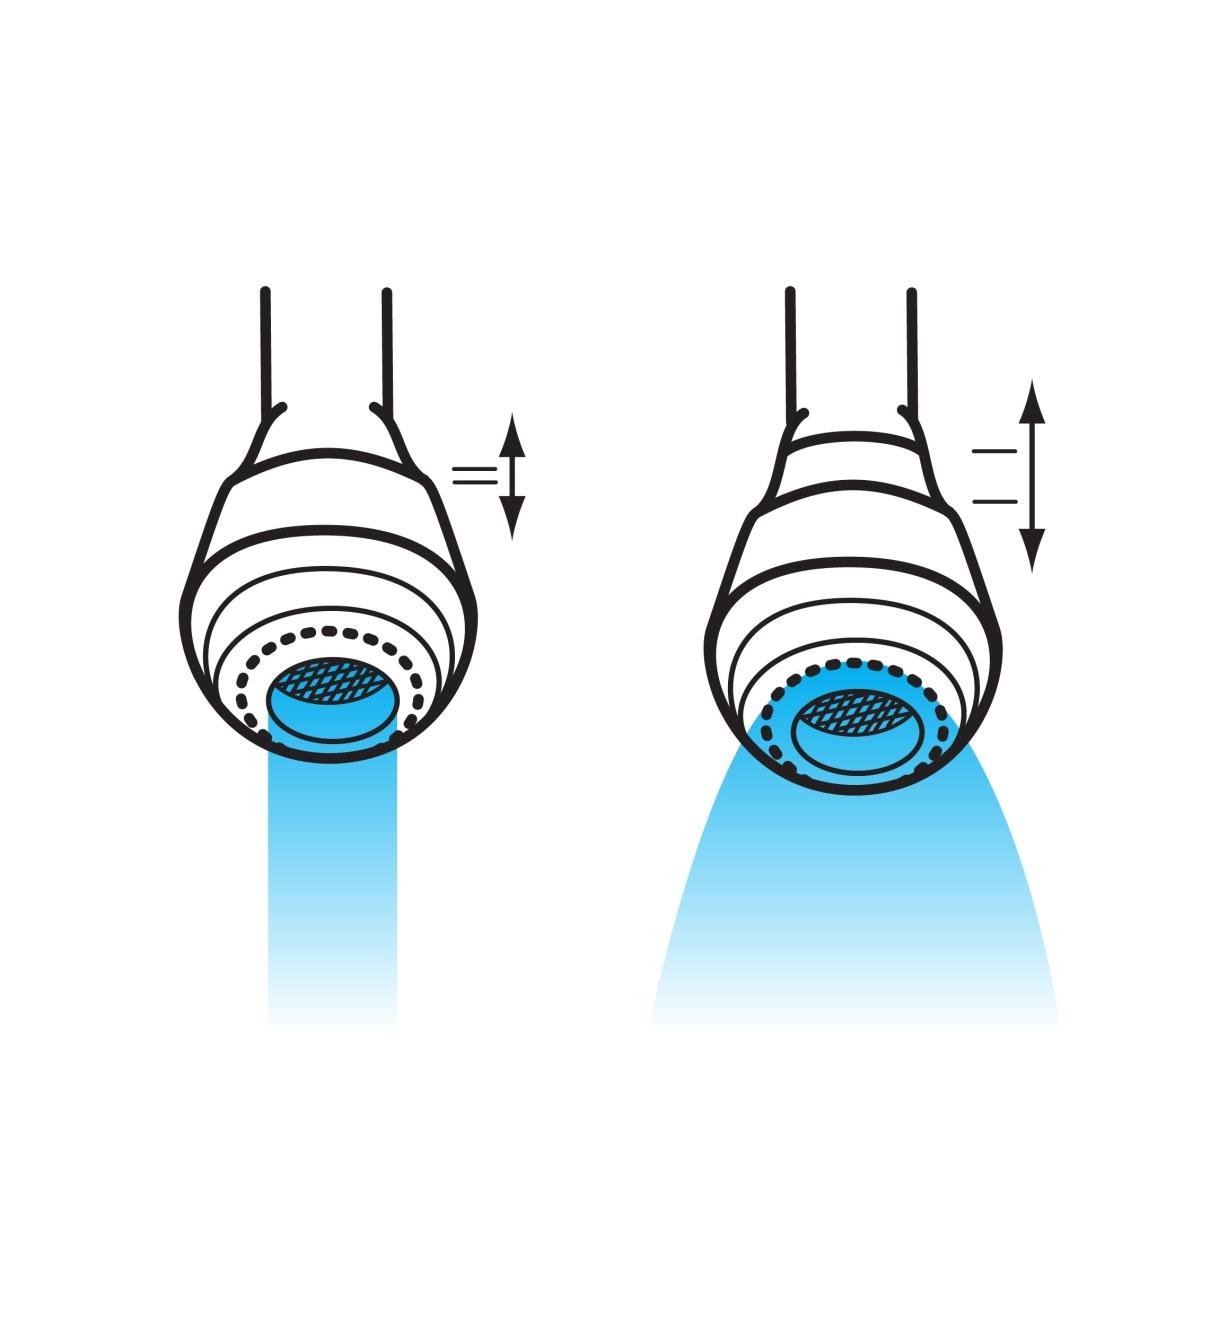 Illustration showing how to adjust the stream